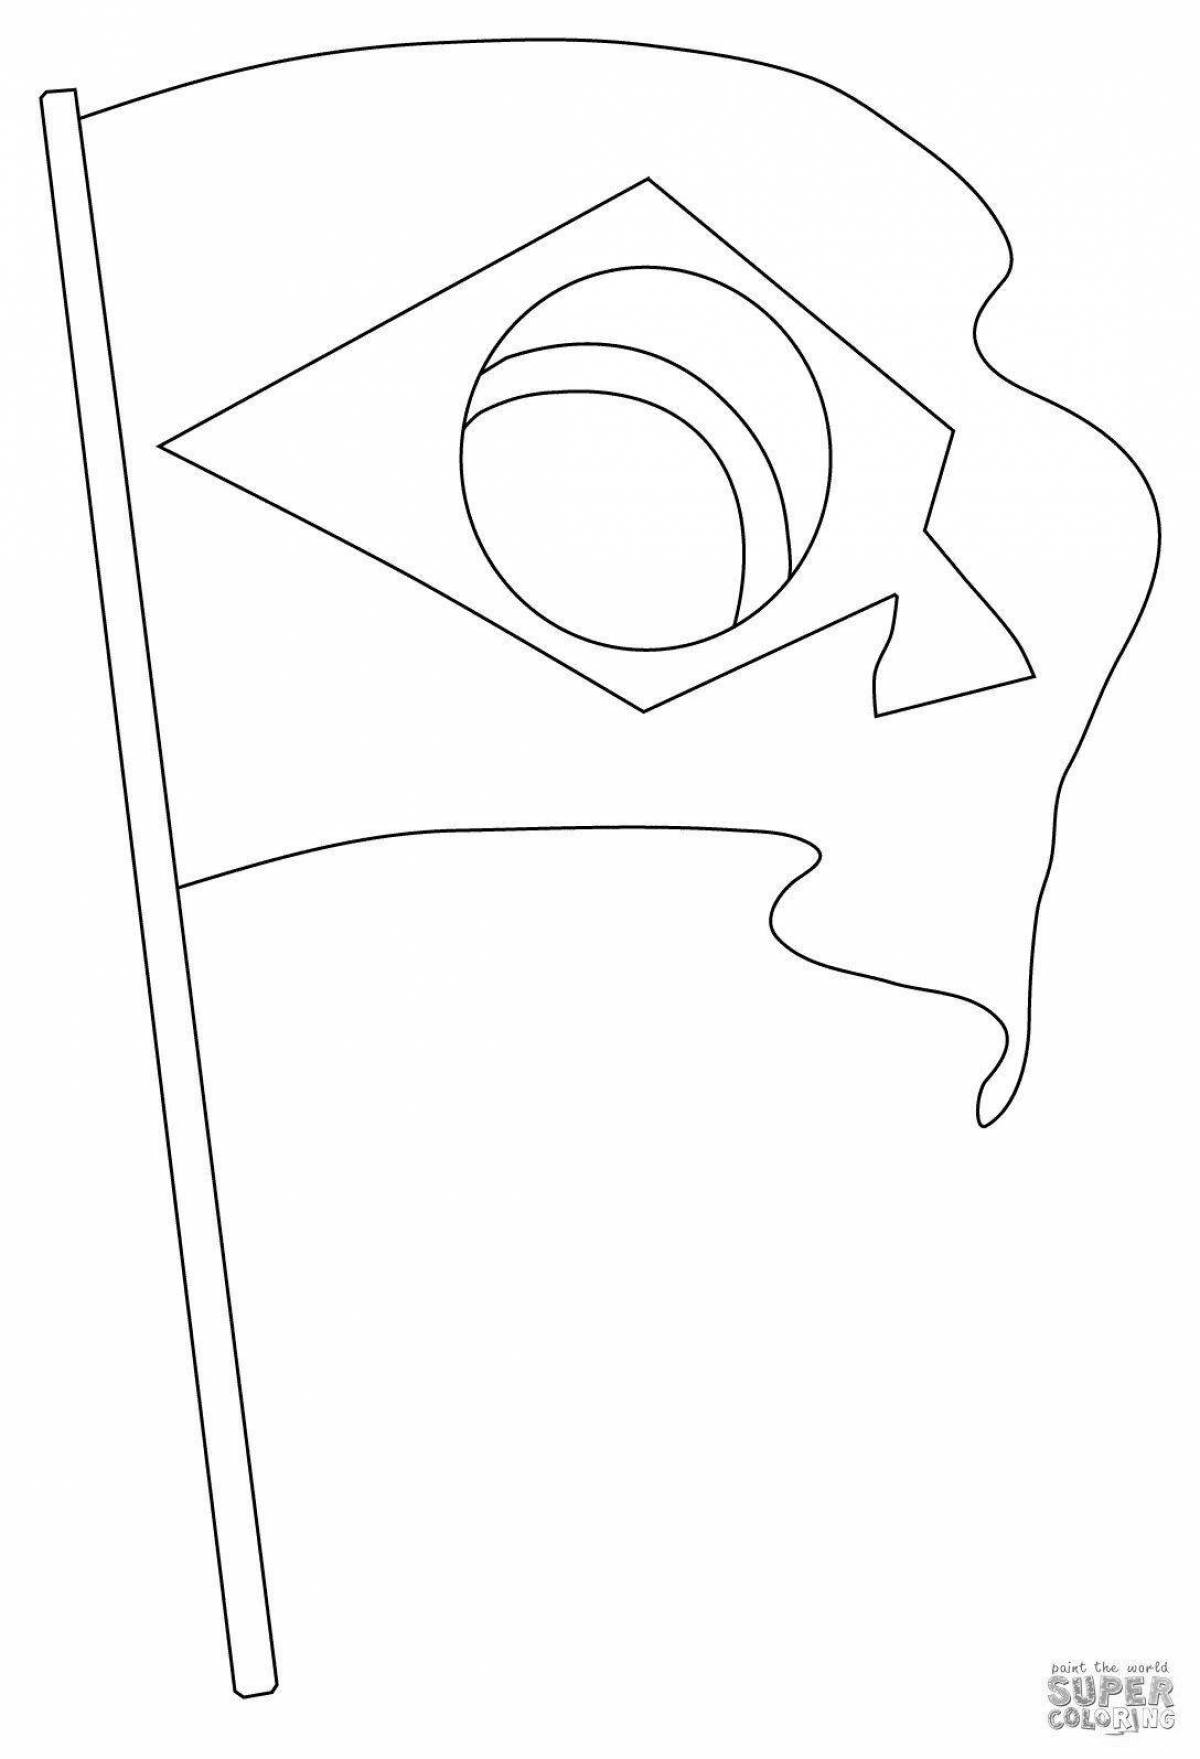 Brazil shiny flag coloring page